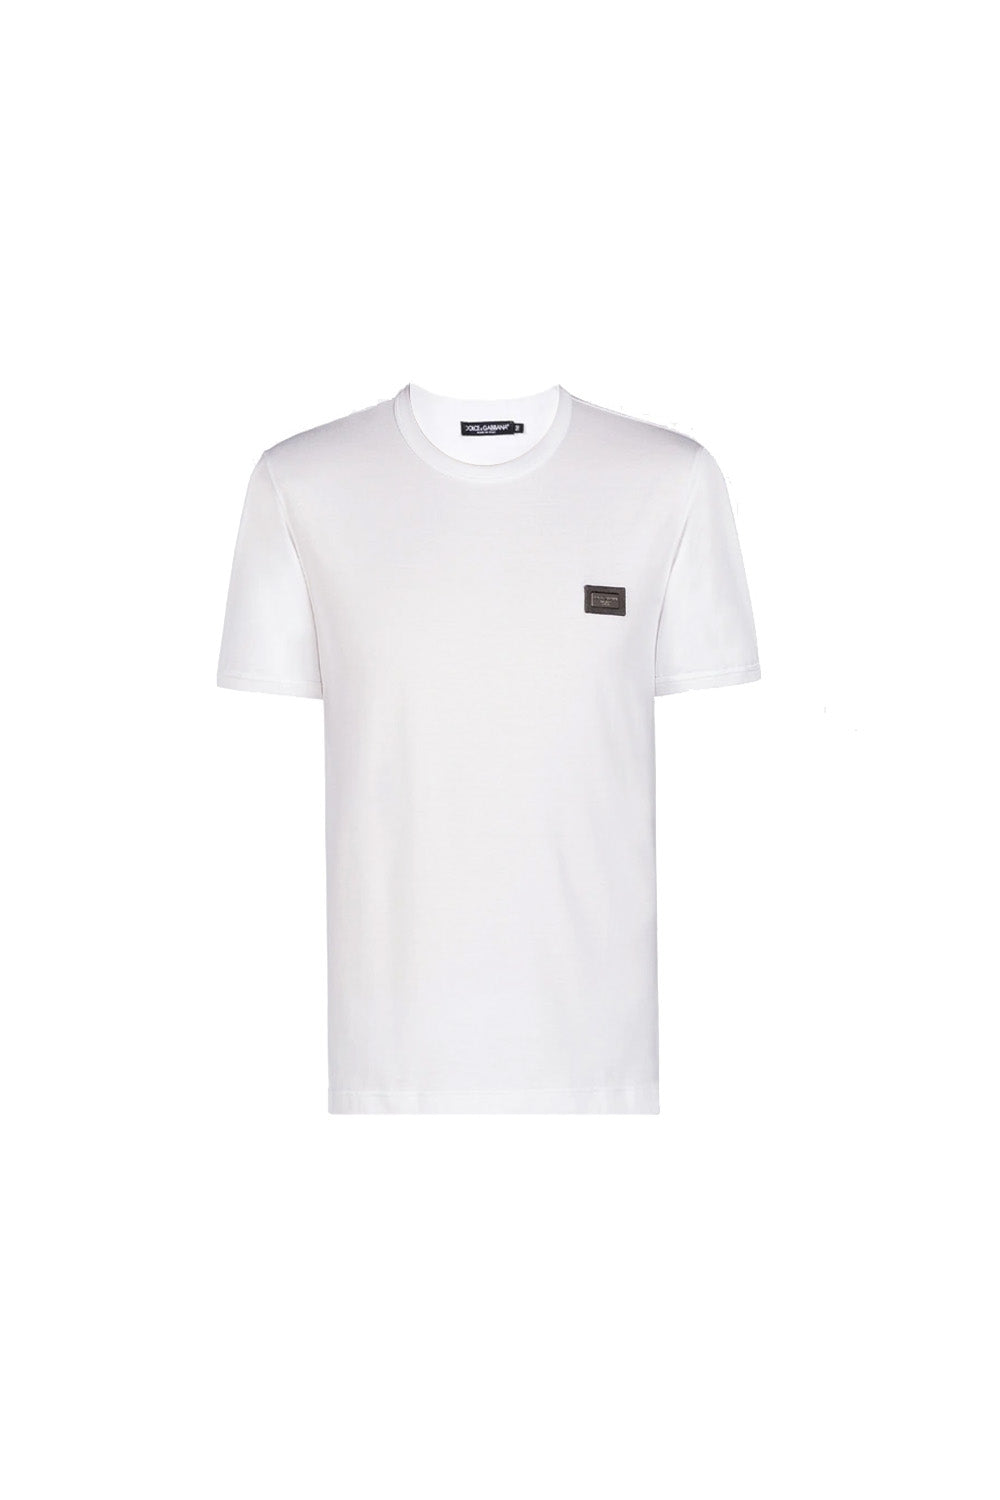 DOLCE & GABBANA T-shirt In Cotton With Plate In White